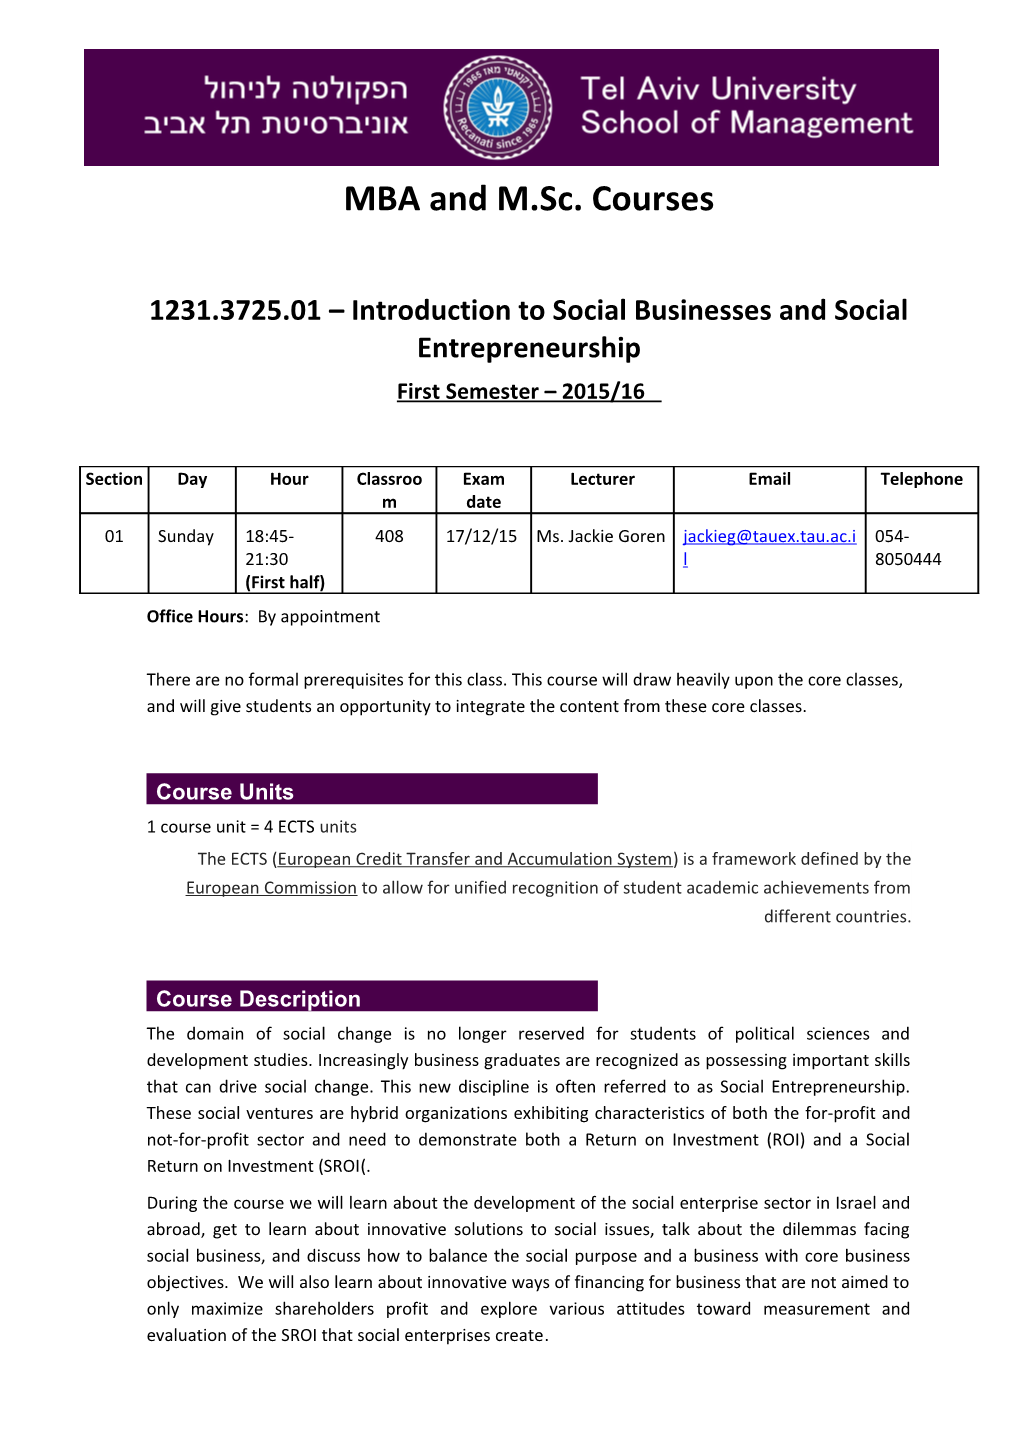 1231.3725.01 Introduction to Social Businesses and Social Entrepreneurship